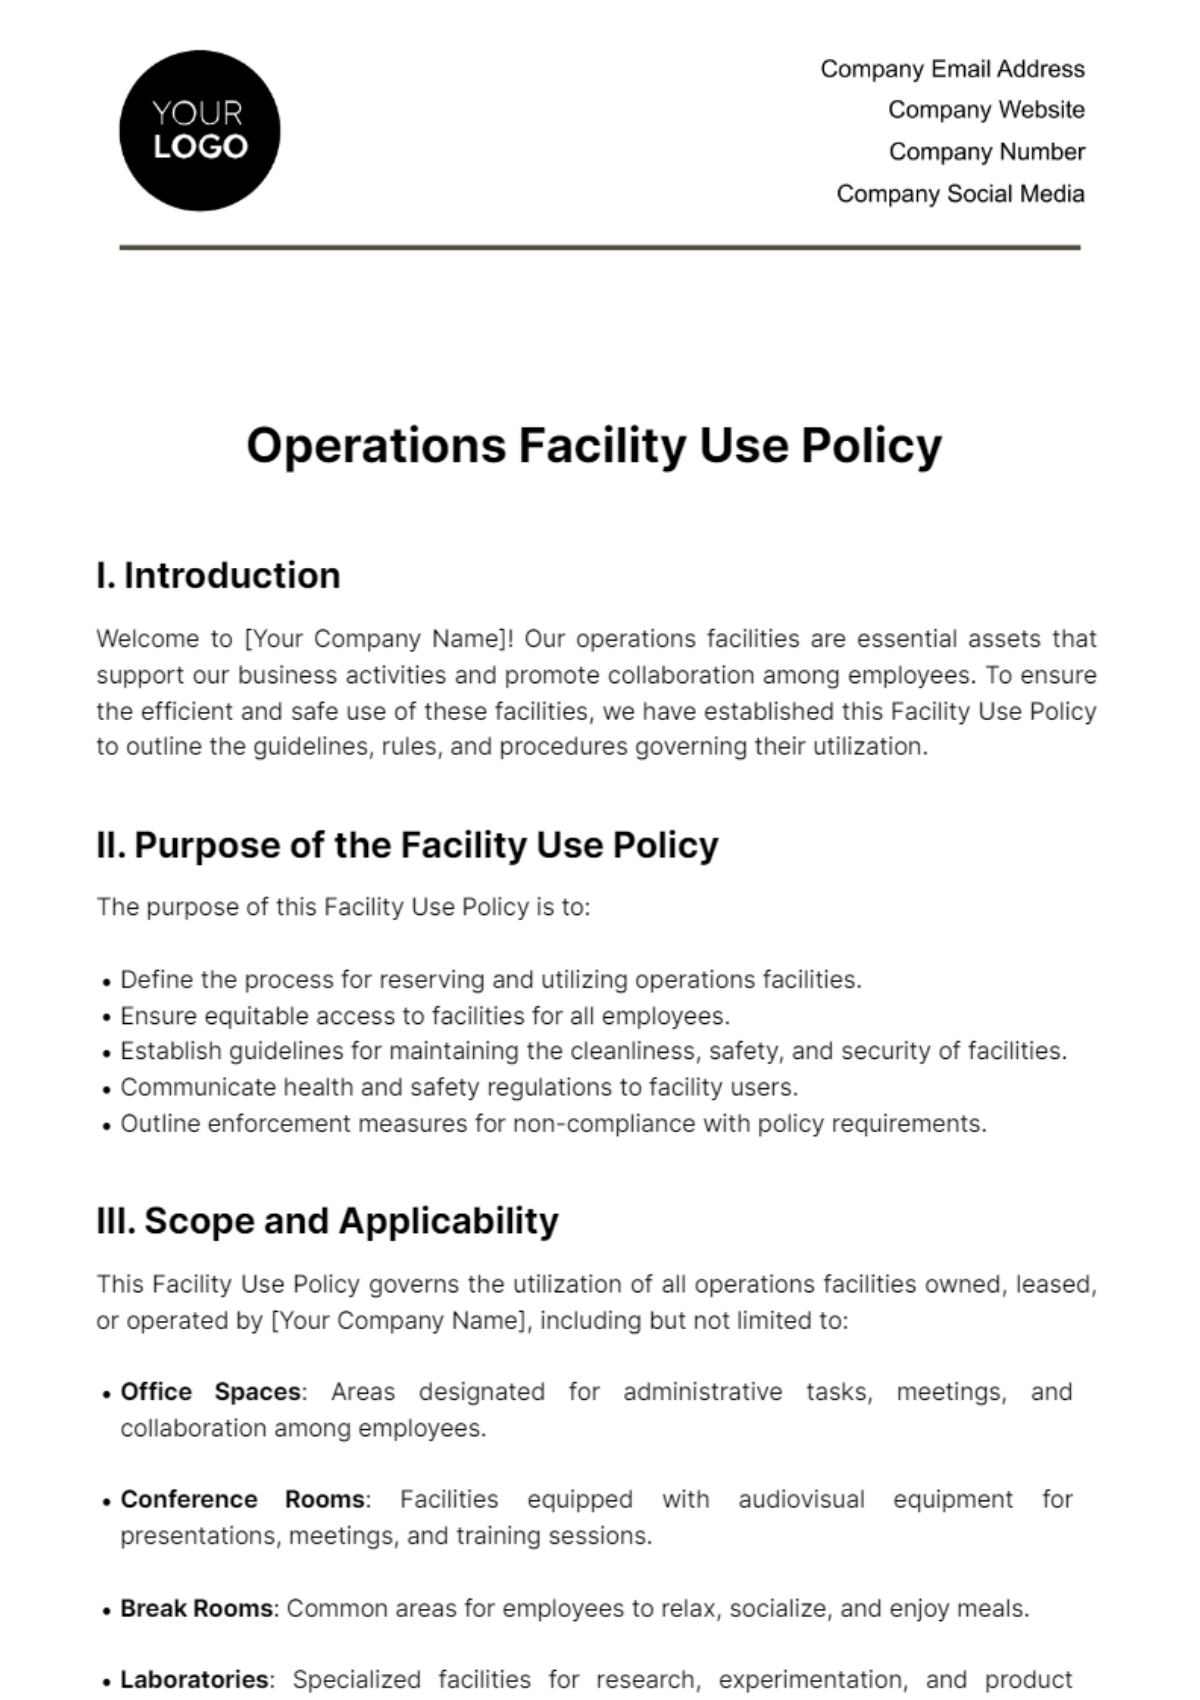 Operations Facility Use Policy Template